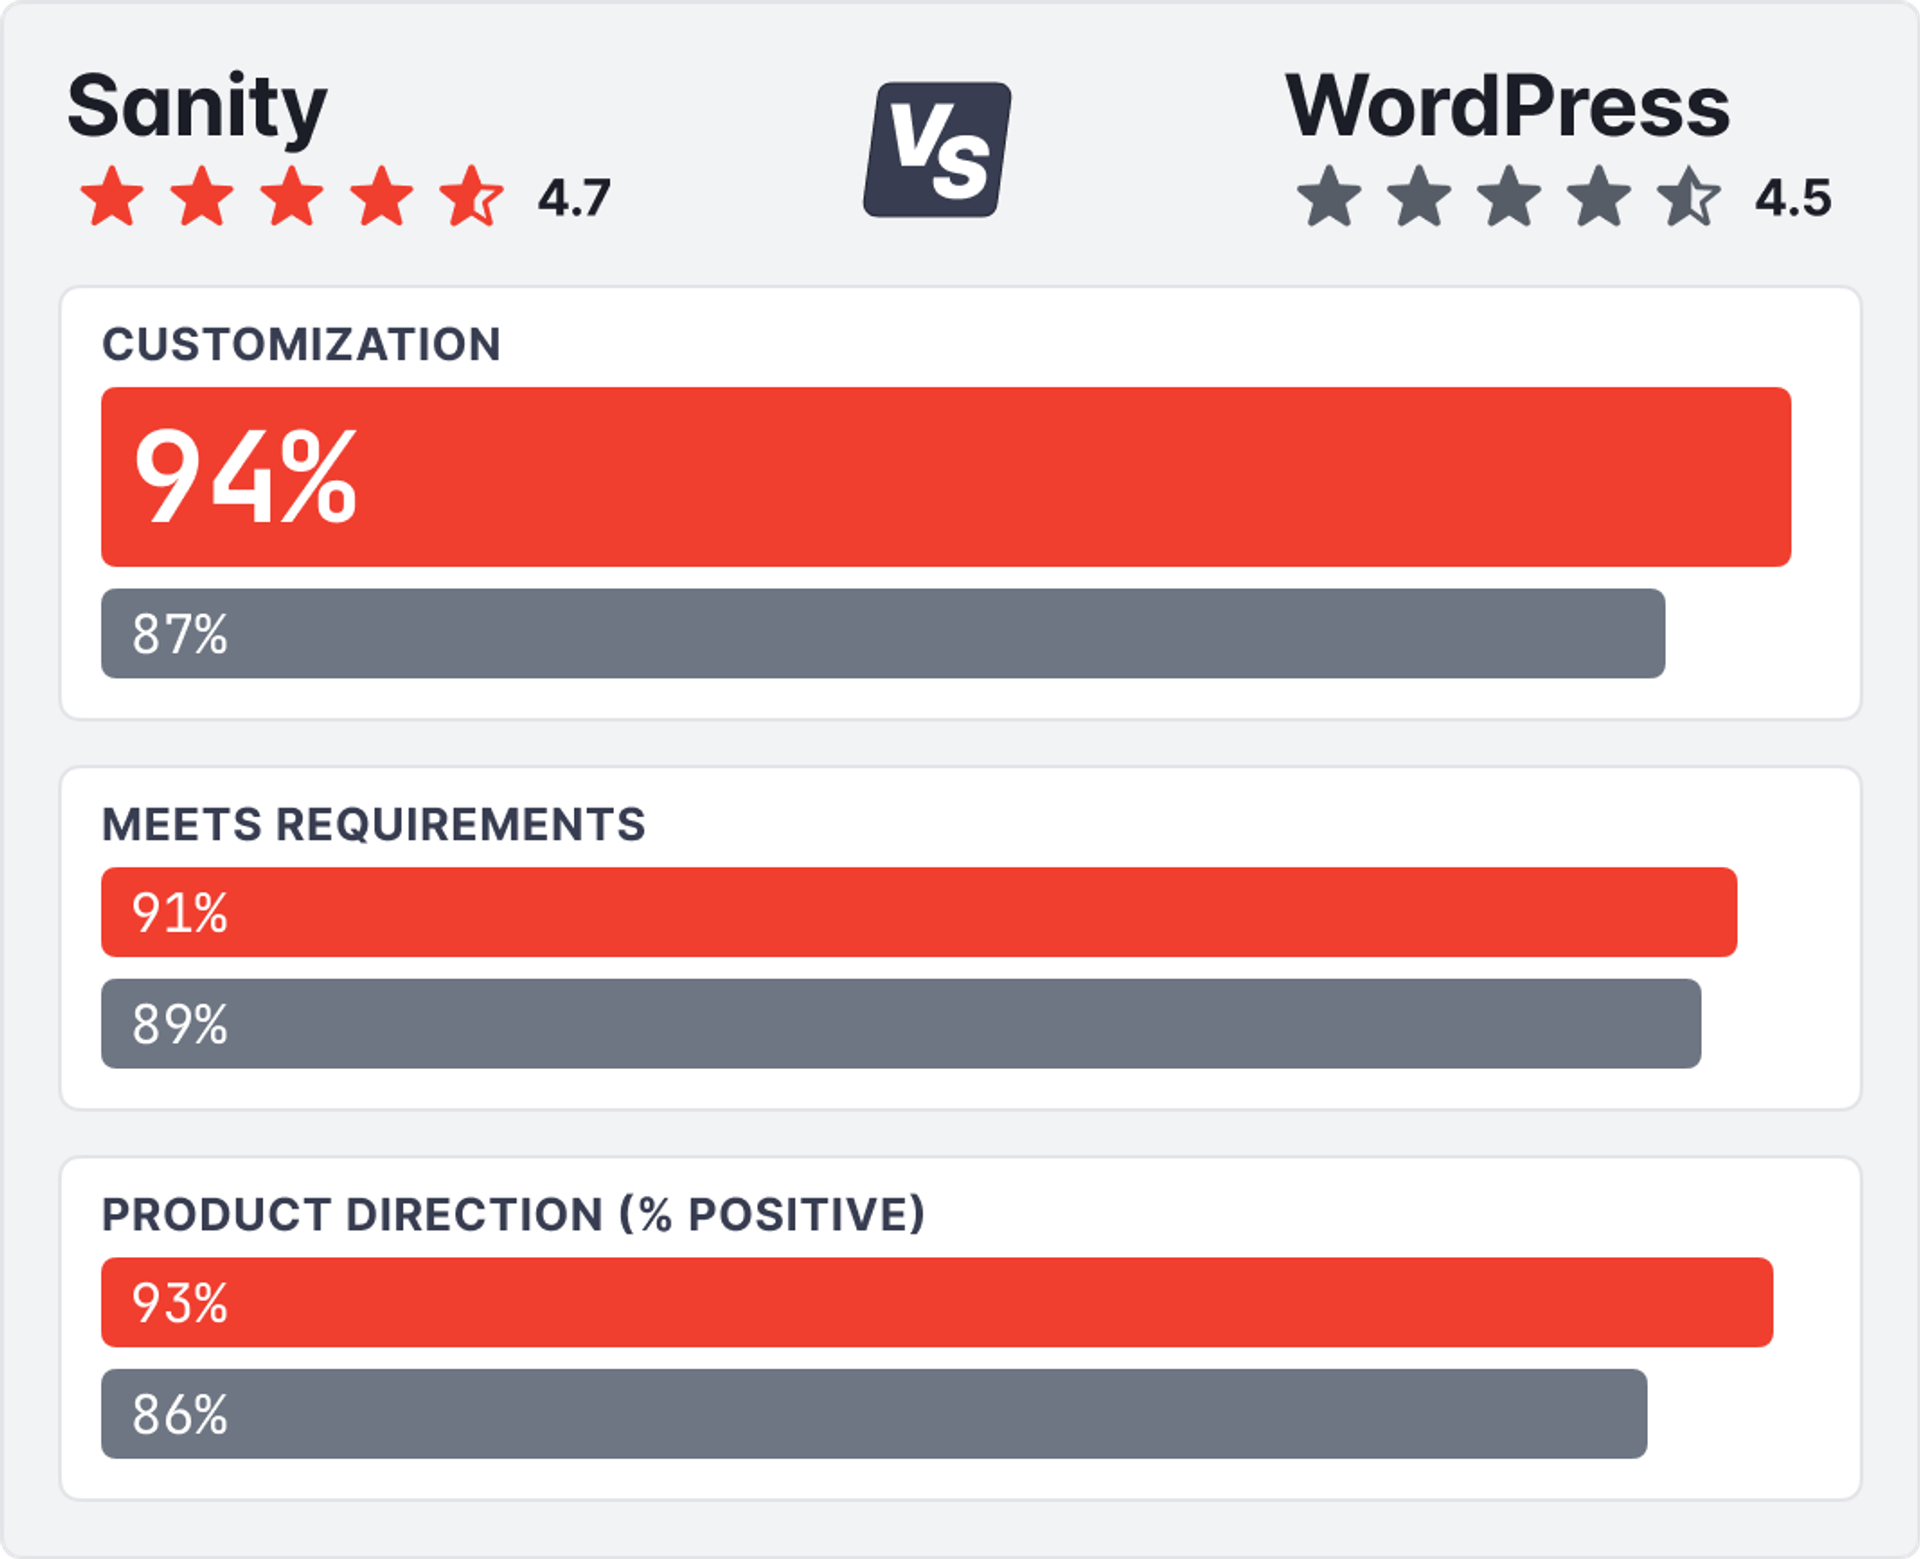 a comparison between sanity and wordpress shows that sanity is more customizable than wordpress